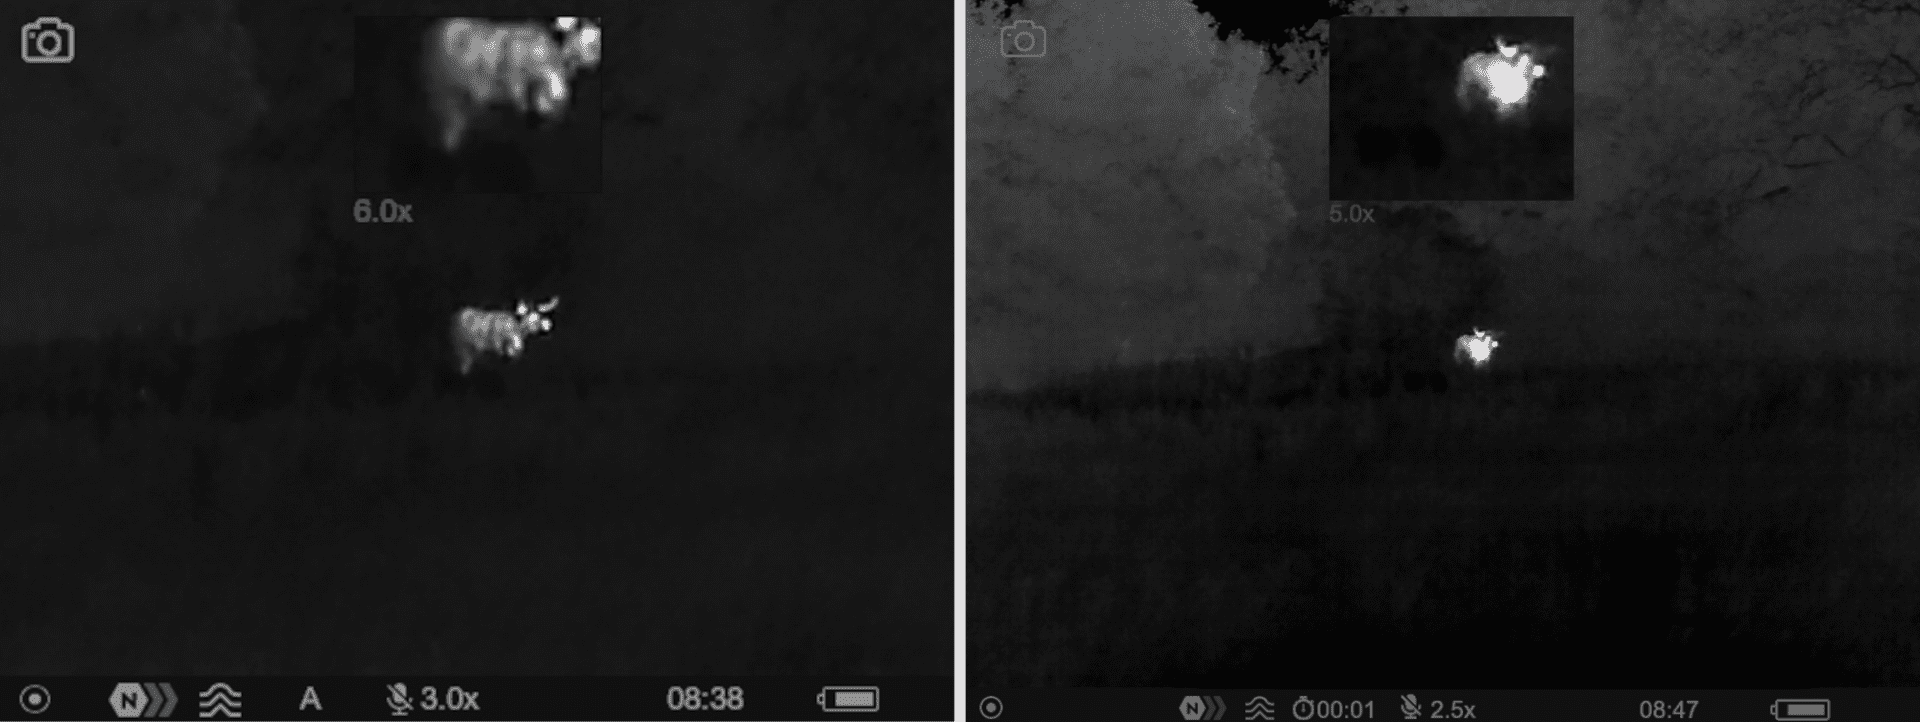 Comparison thermal Image of cattle on an Axion XM30F and Axion 2 XG35